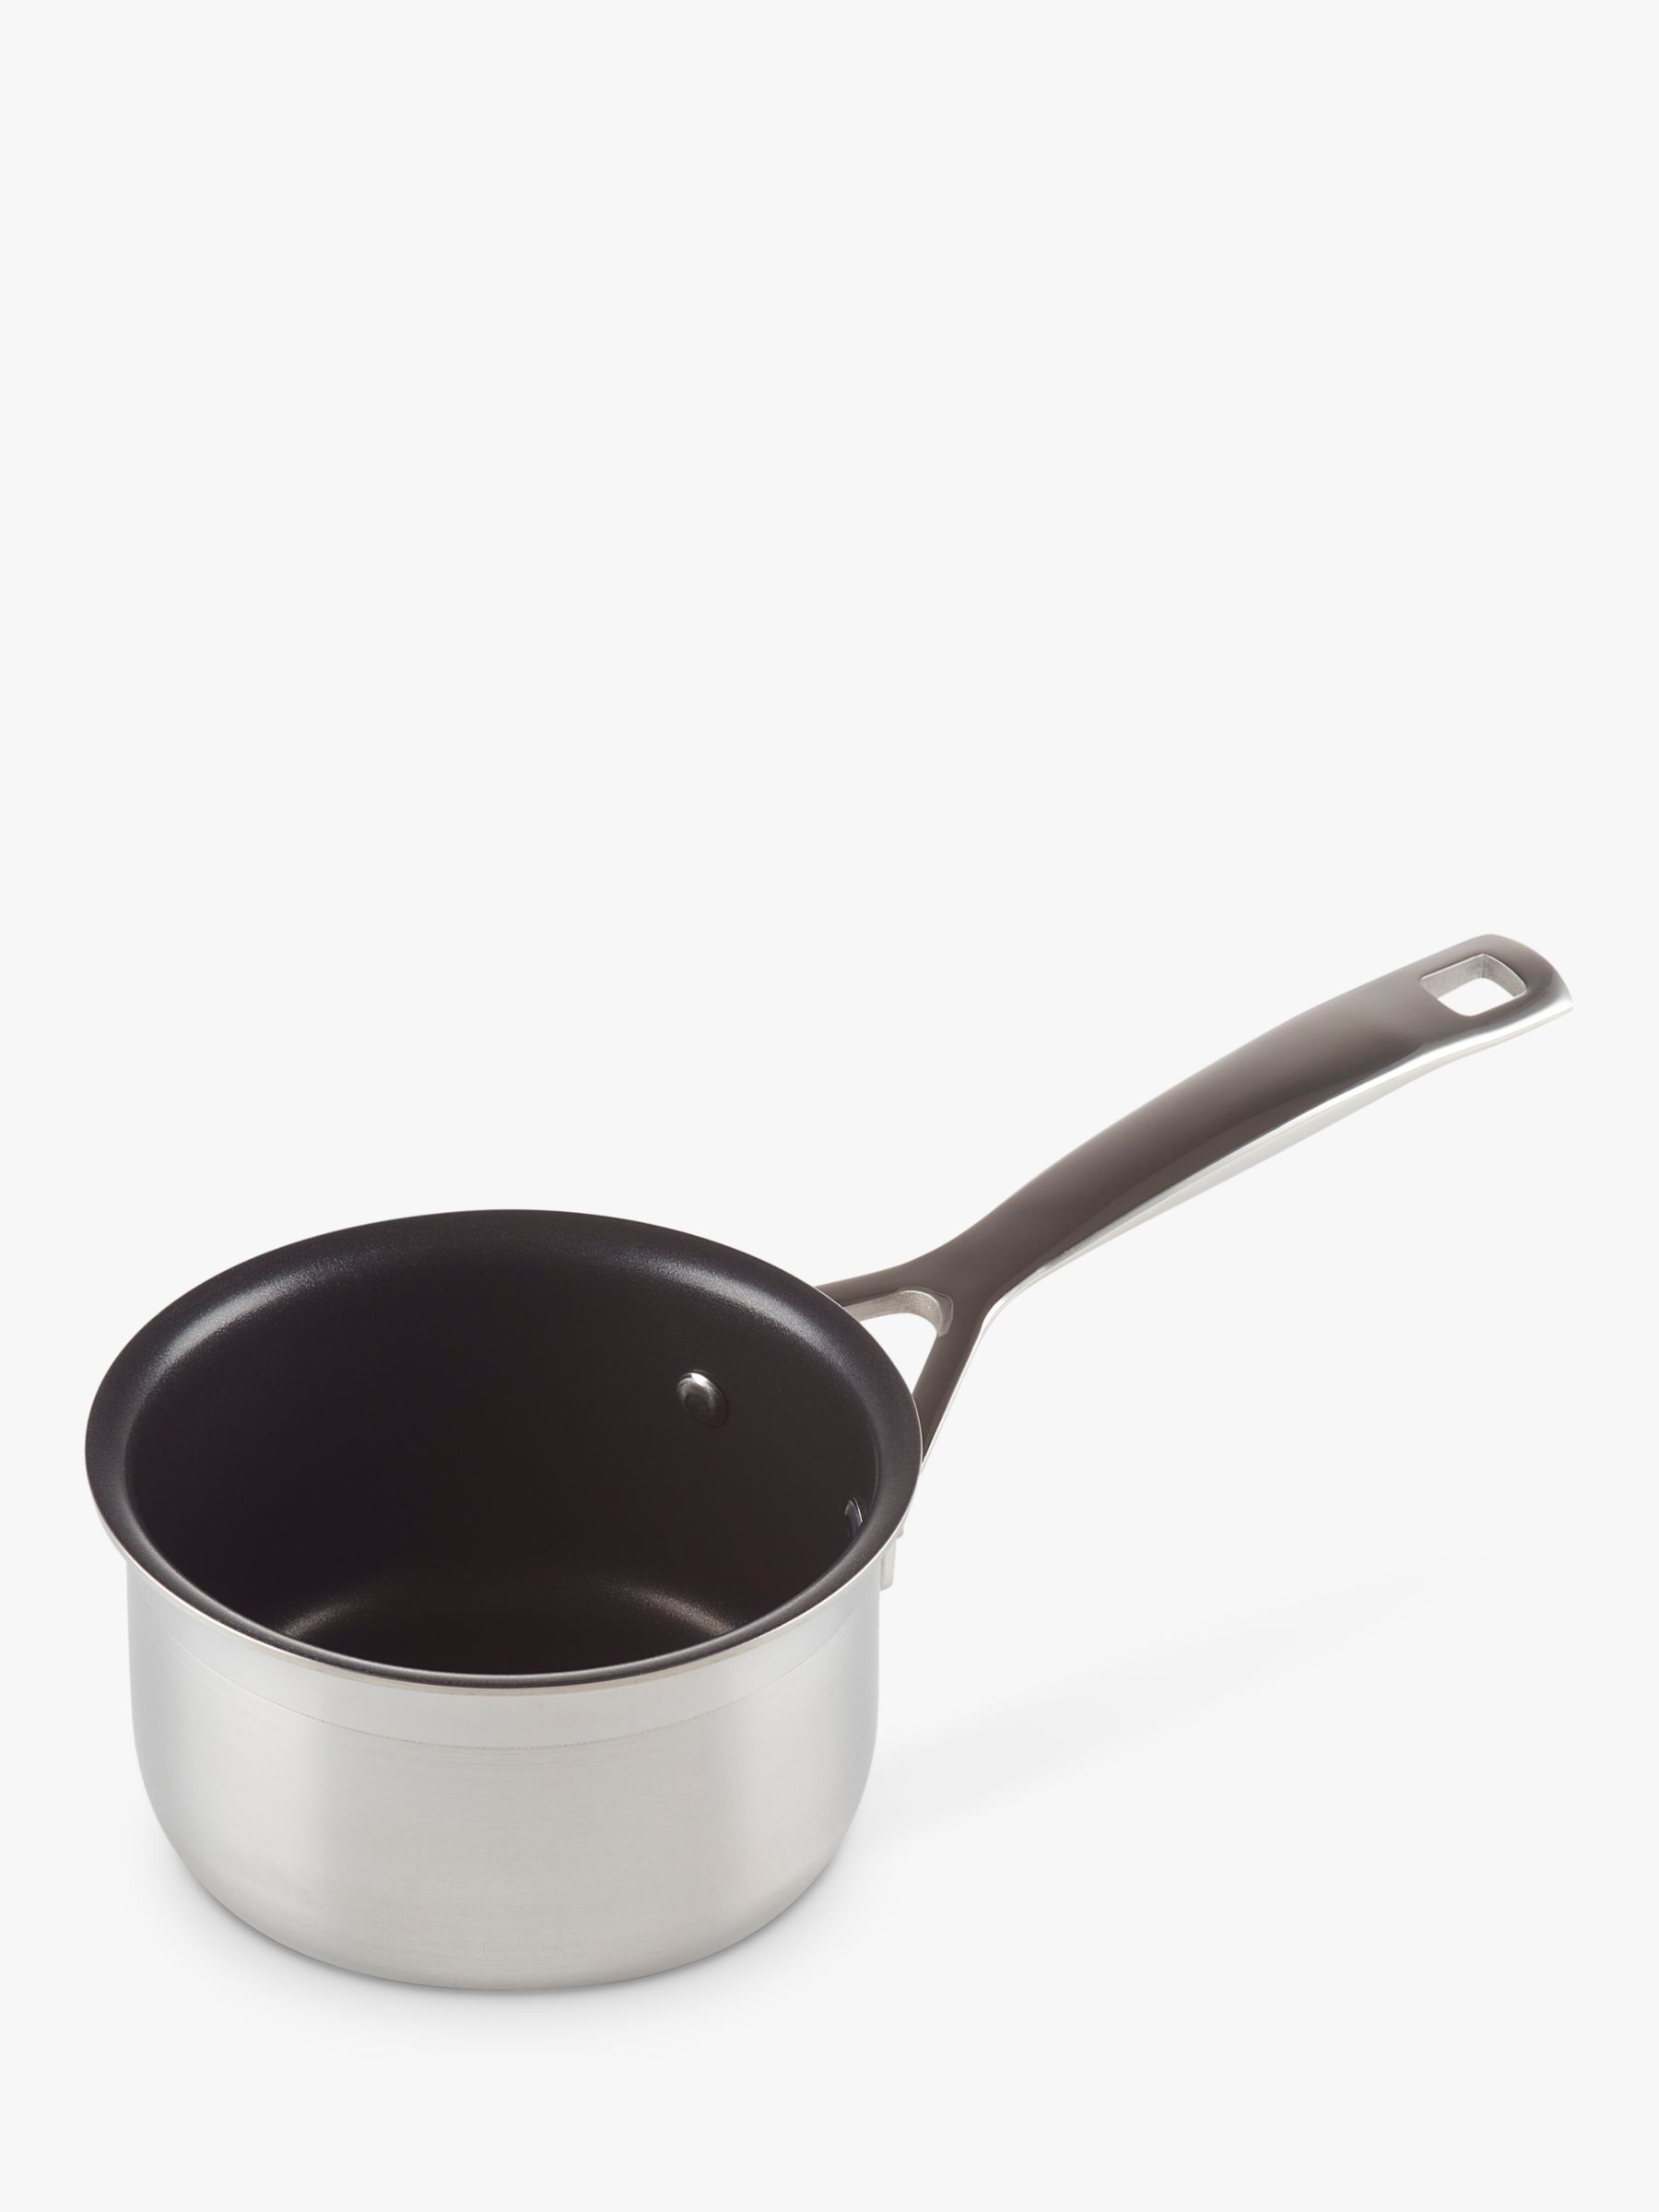 New Le Creuset 14cm 3 Ply Stainless Steel Milk Pan 